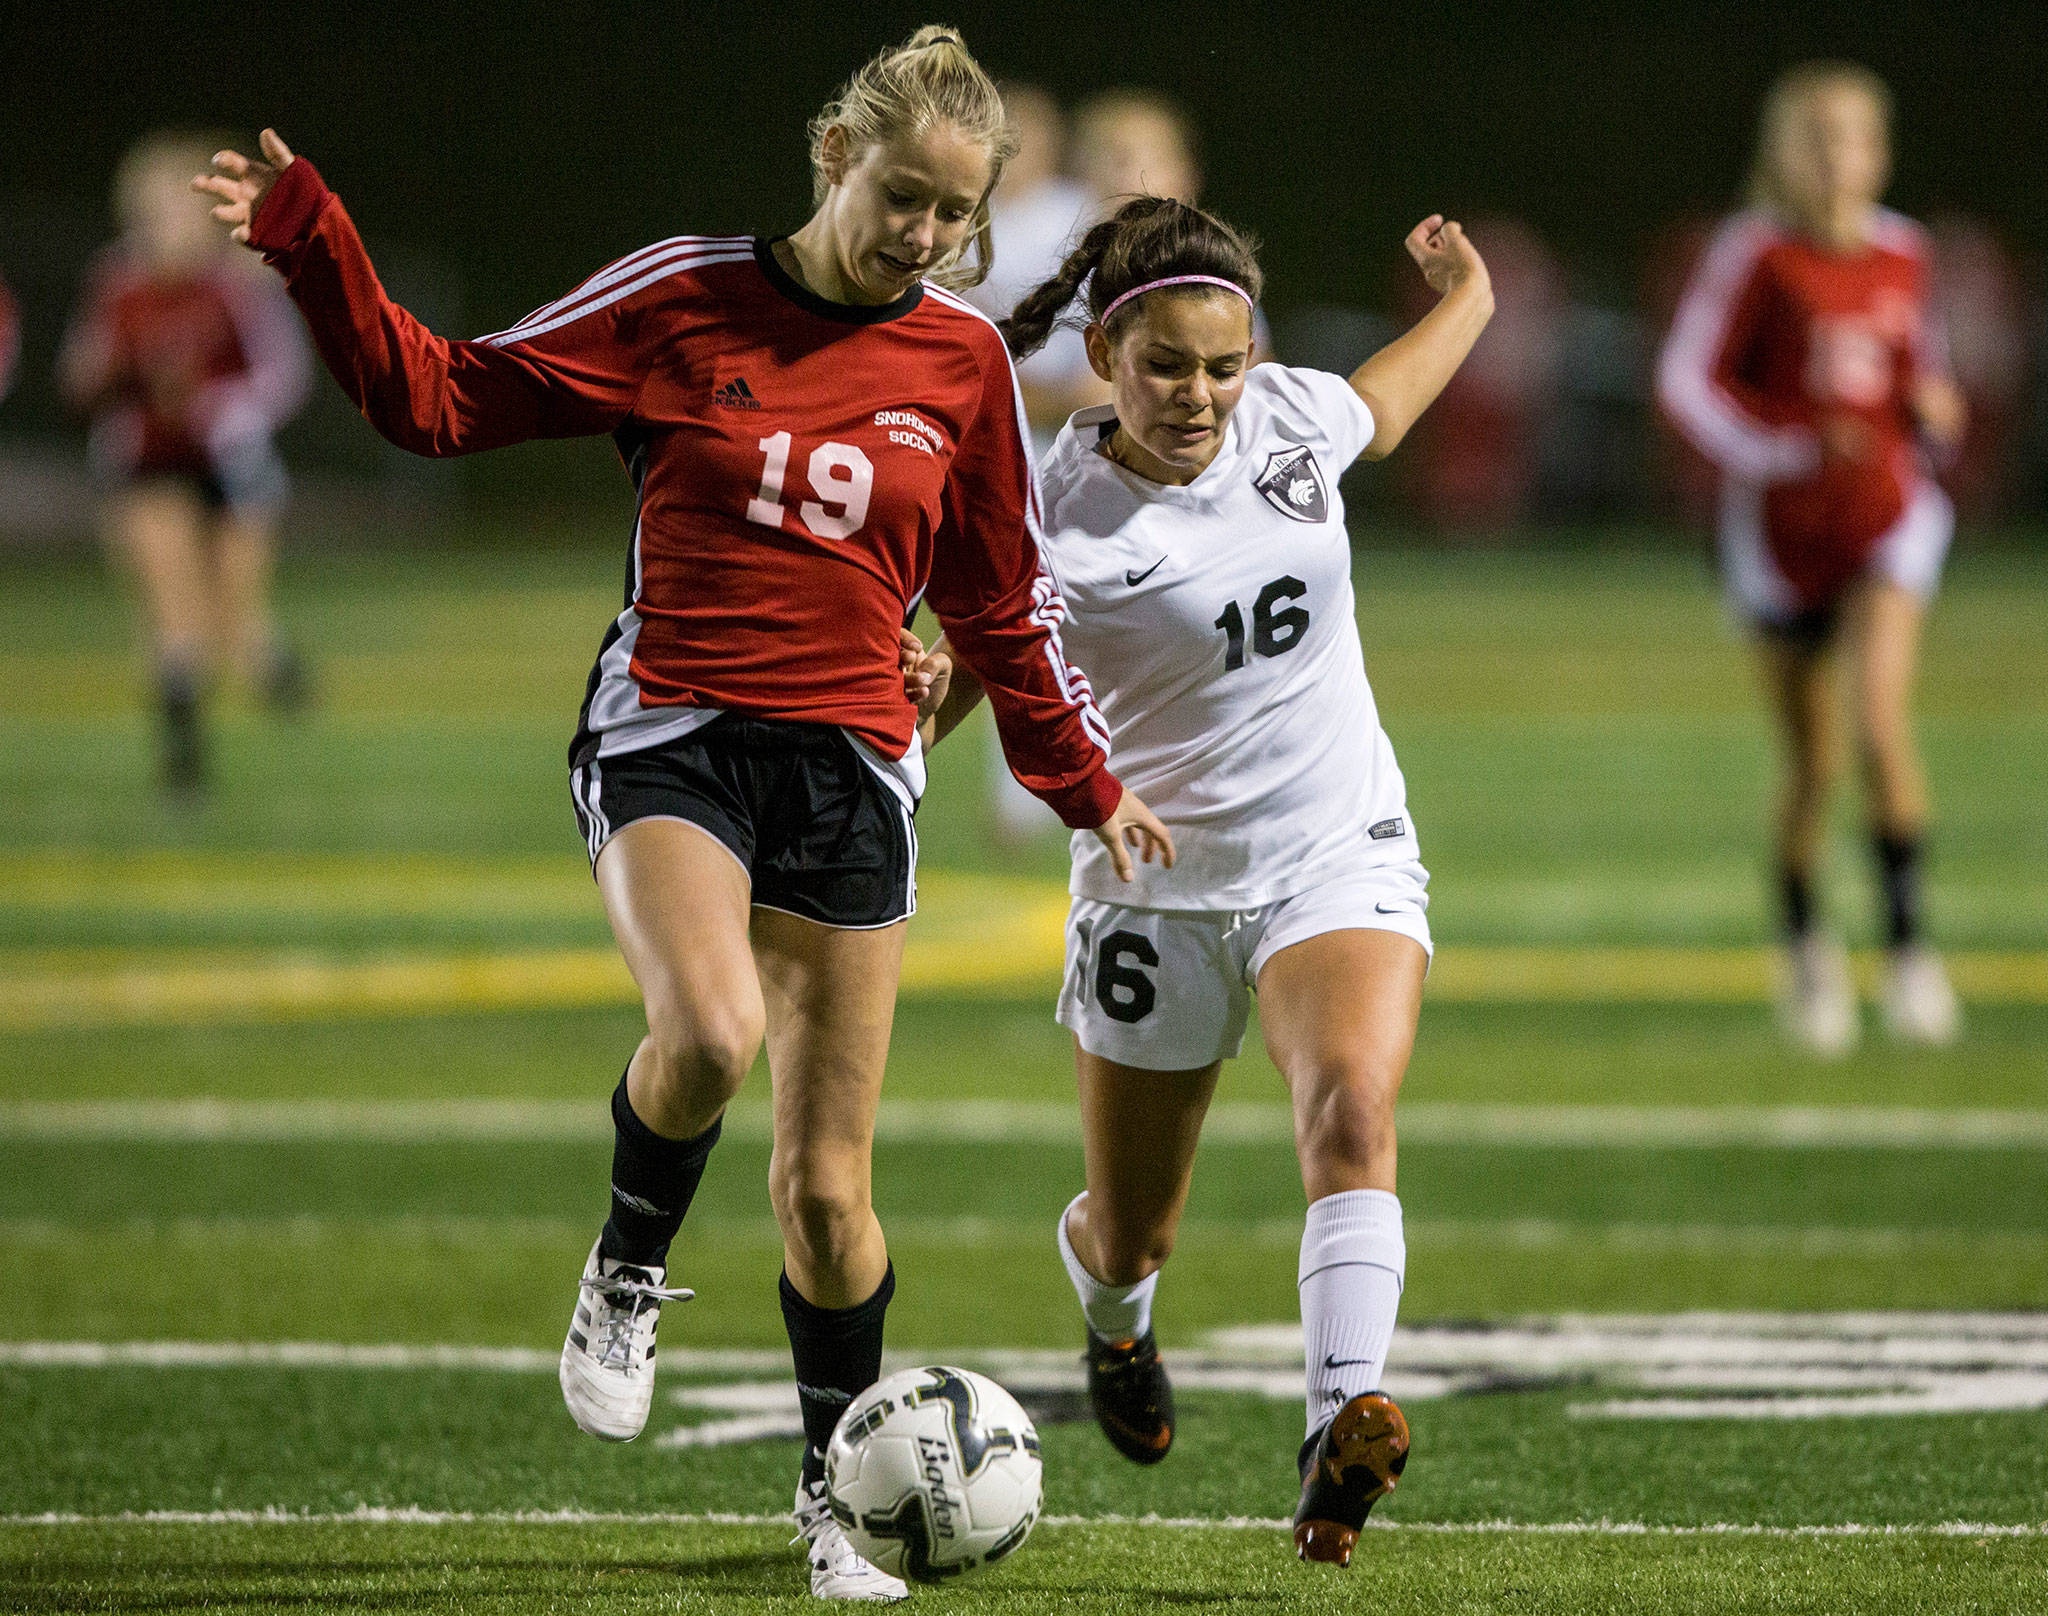 Snohomish’s Gracie Winders (left) battles Cedarcrest’s Lauren Miller for control of a loose ball during a Wesco 3A match at Veterans Memorial Stadium in Snohomish. Bree Nichols’ overtime goal lifted the Panthers to a 4-3 victory over the Red Wolves in the first matchup between the two teams as conference foes. Sarah Hommas scored twice for Cedarcrest. (Olivia Vanni / The Herald)